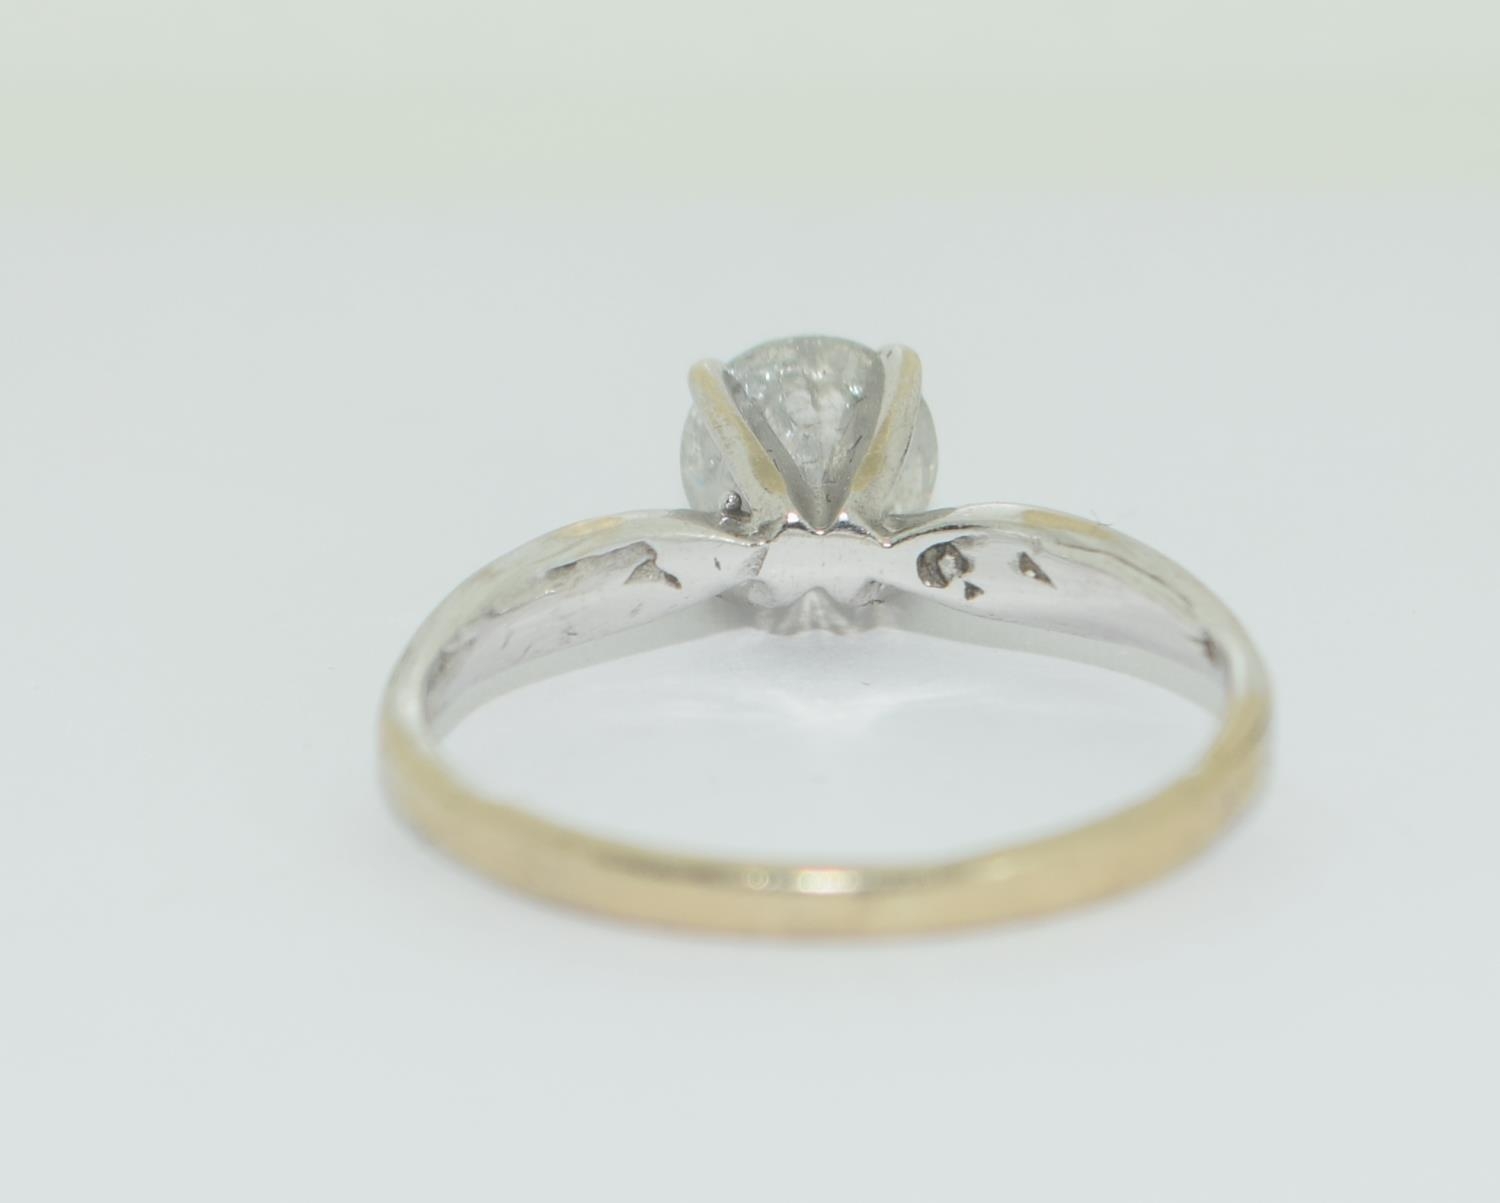 9ct white gold ladies diamond solitaire ring approx 85 points size M - Image 3 of 7